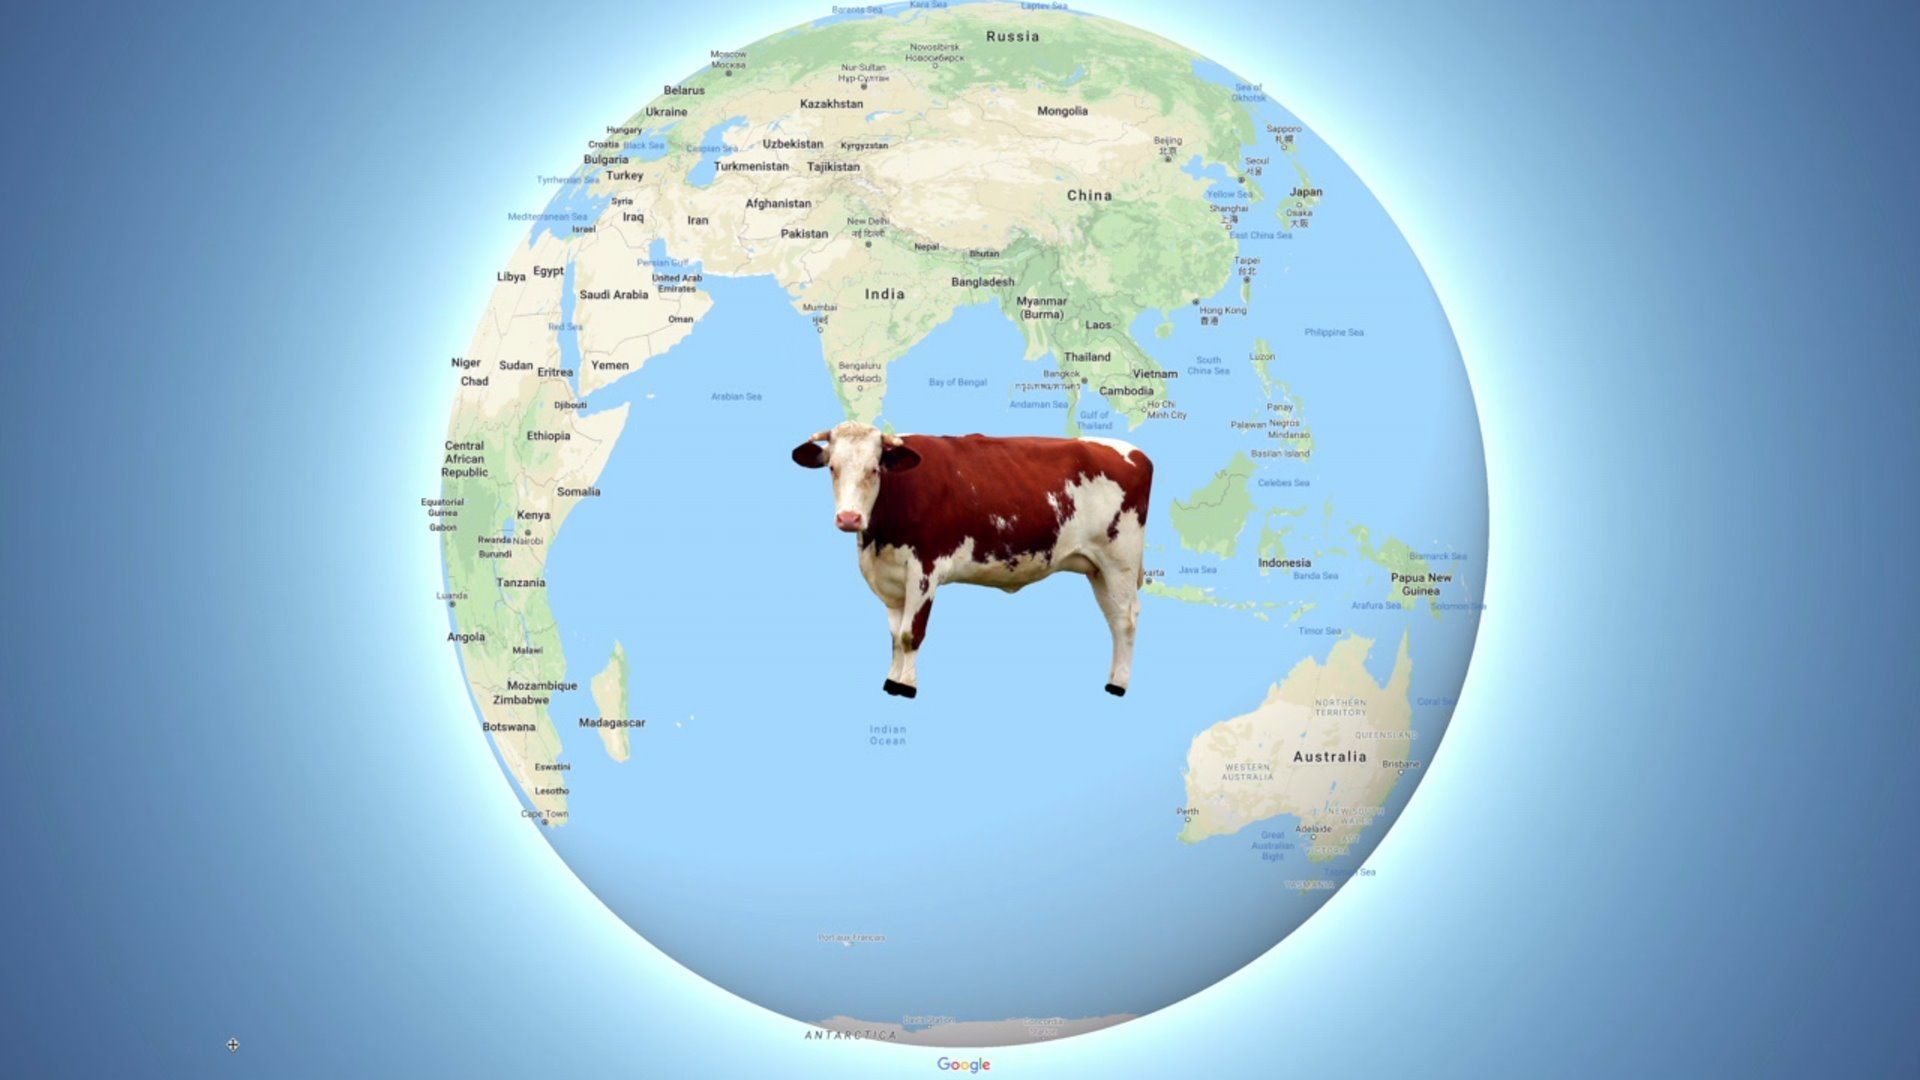 Wham Cam: Number of Cows on Earth?